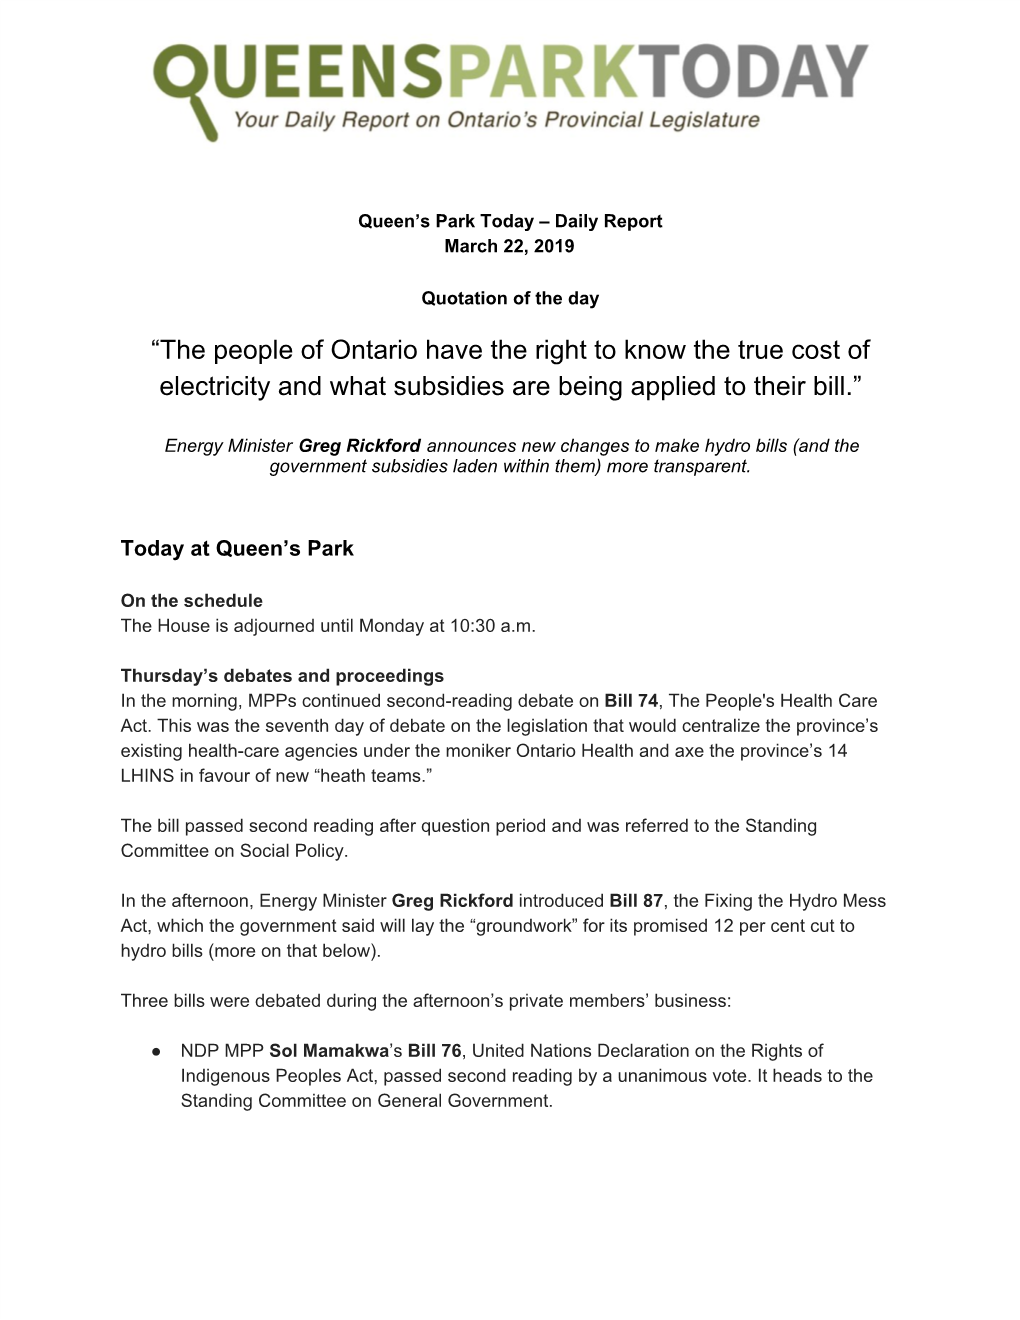 The People of Ontario Have the Right to Know the True Cost of Electricity and What Subsidies Are Being Applied to Their Bill.”